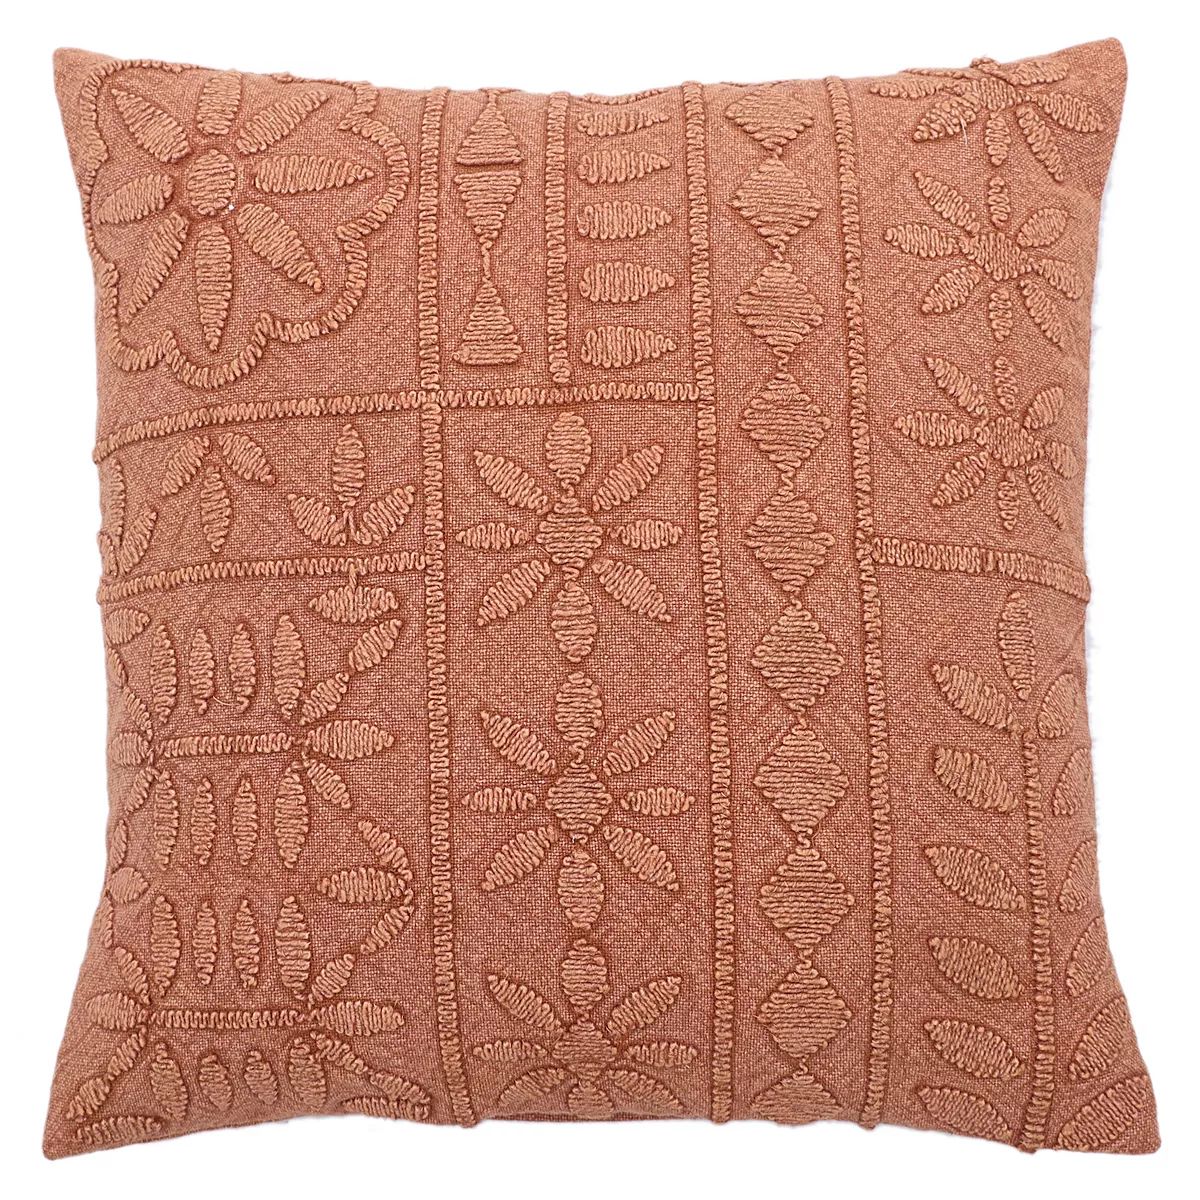 Sonoma Goods For Life® Enzyme Wash Floral 18" x 18" Throw Pillow | Kohl's